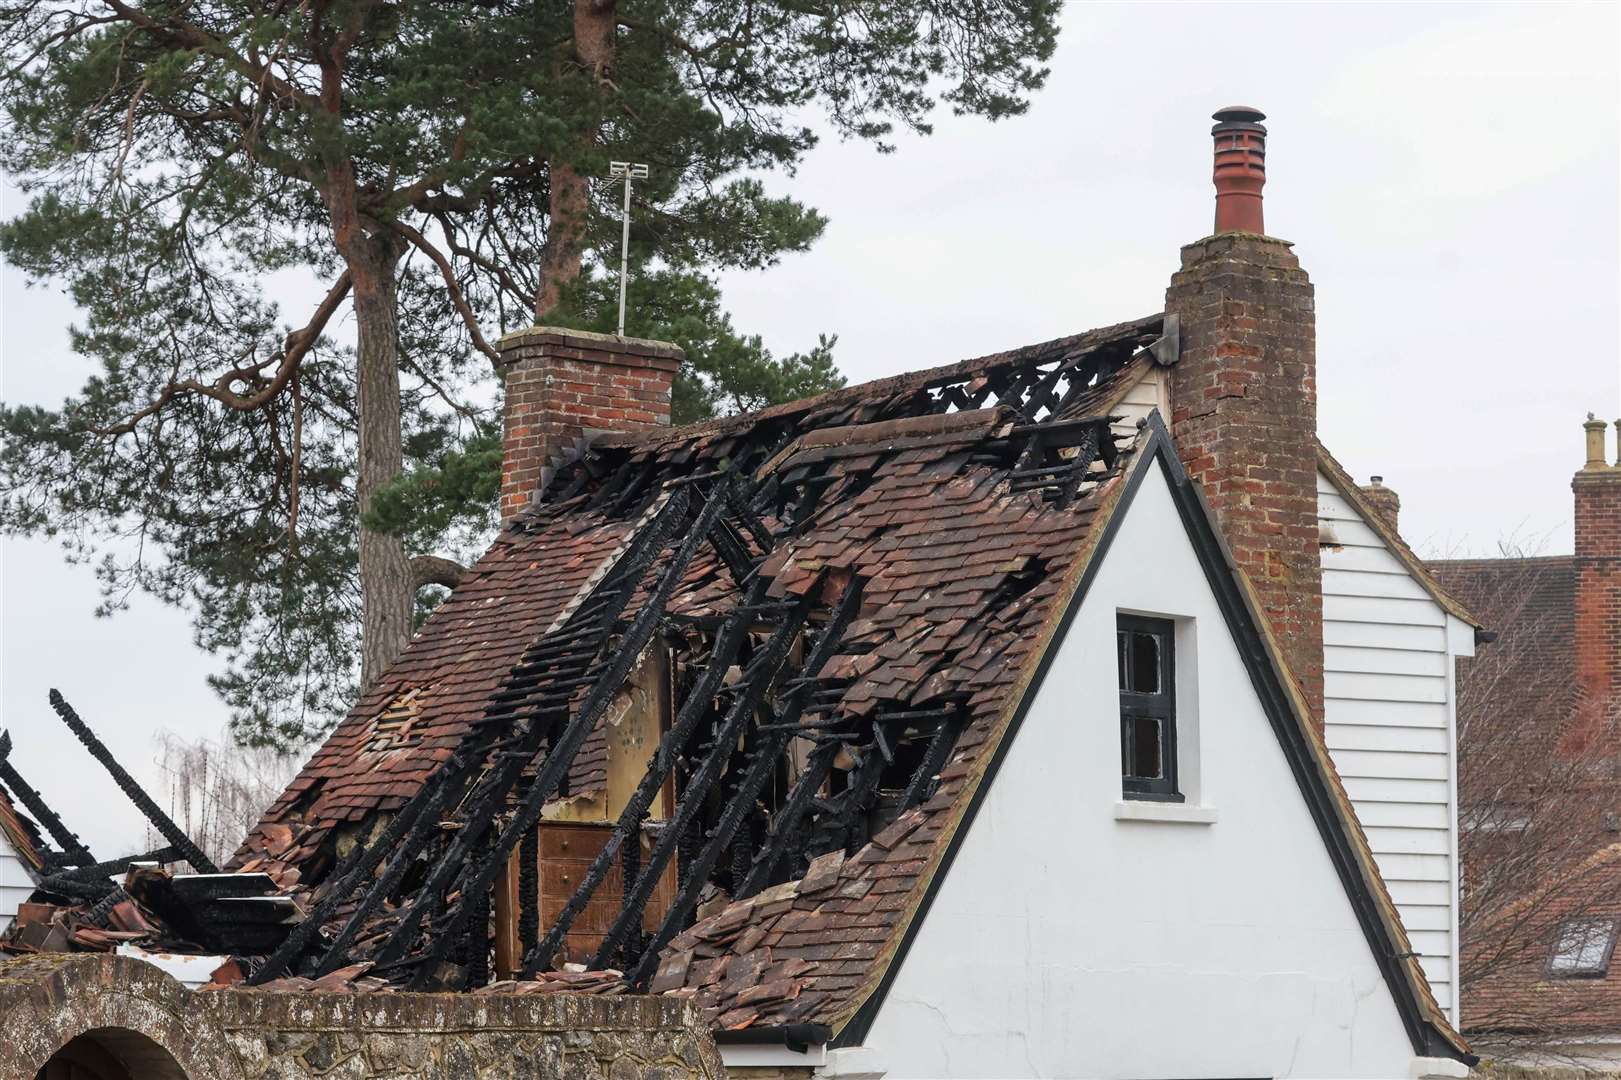 The damage caused by the fire in West Malling. Picture: UKNIP (62790767)